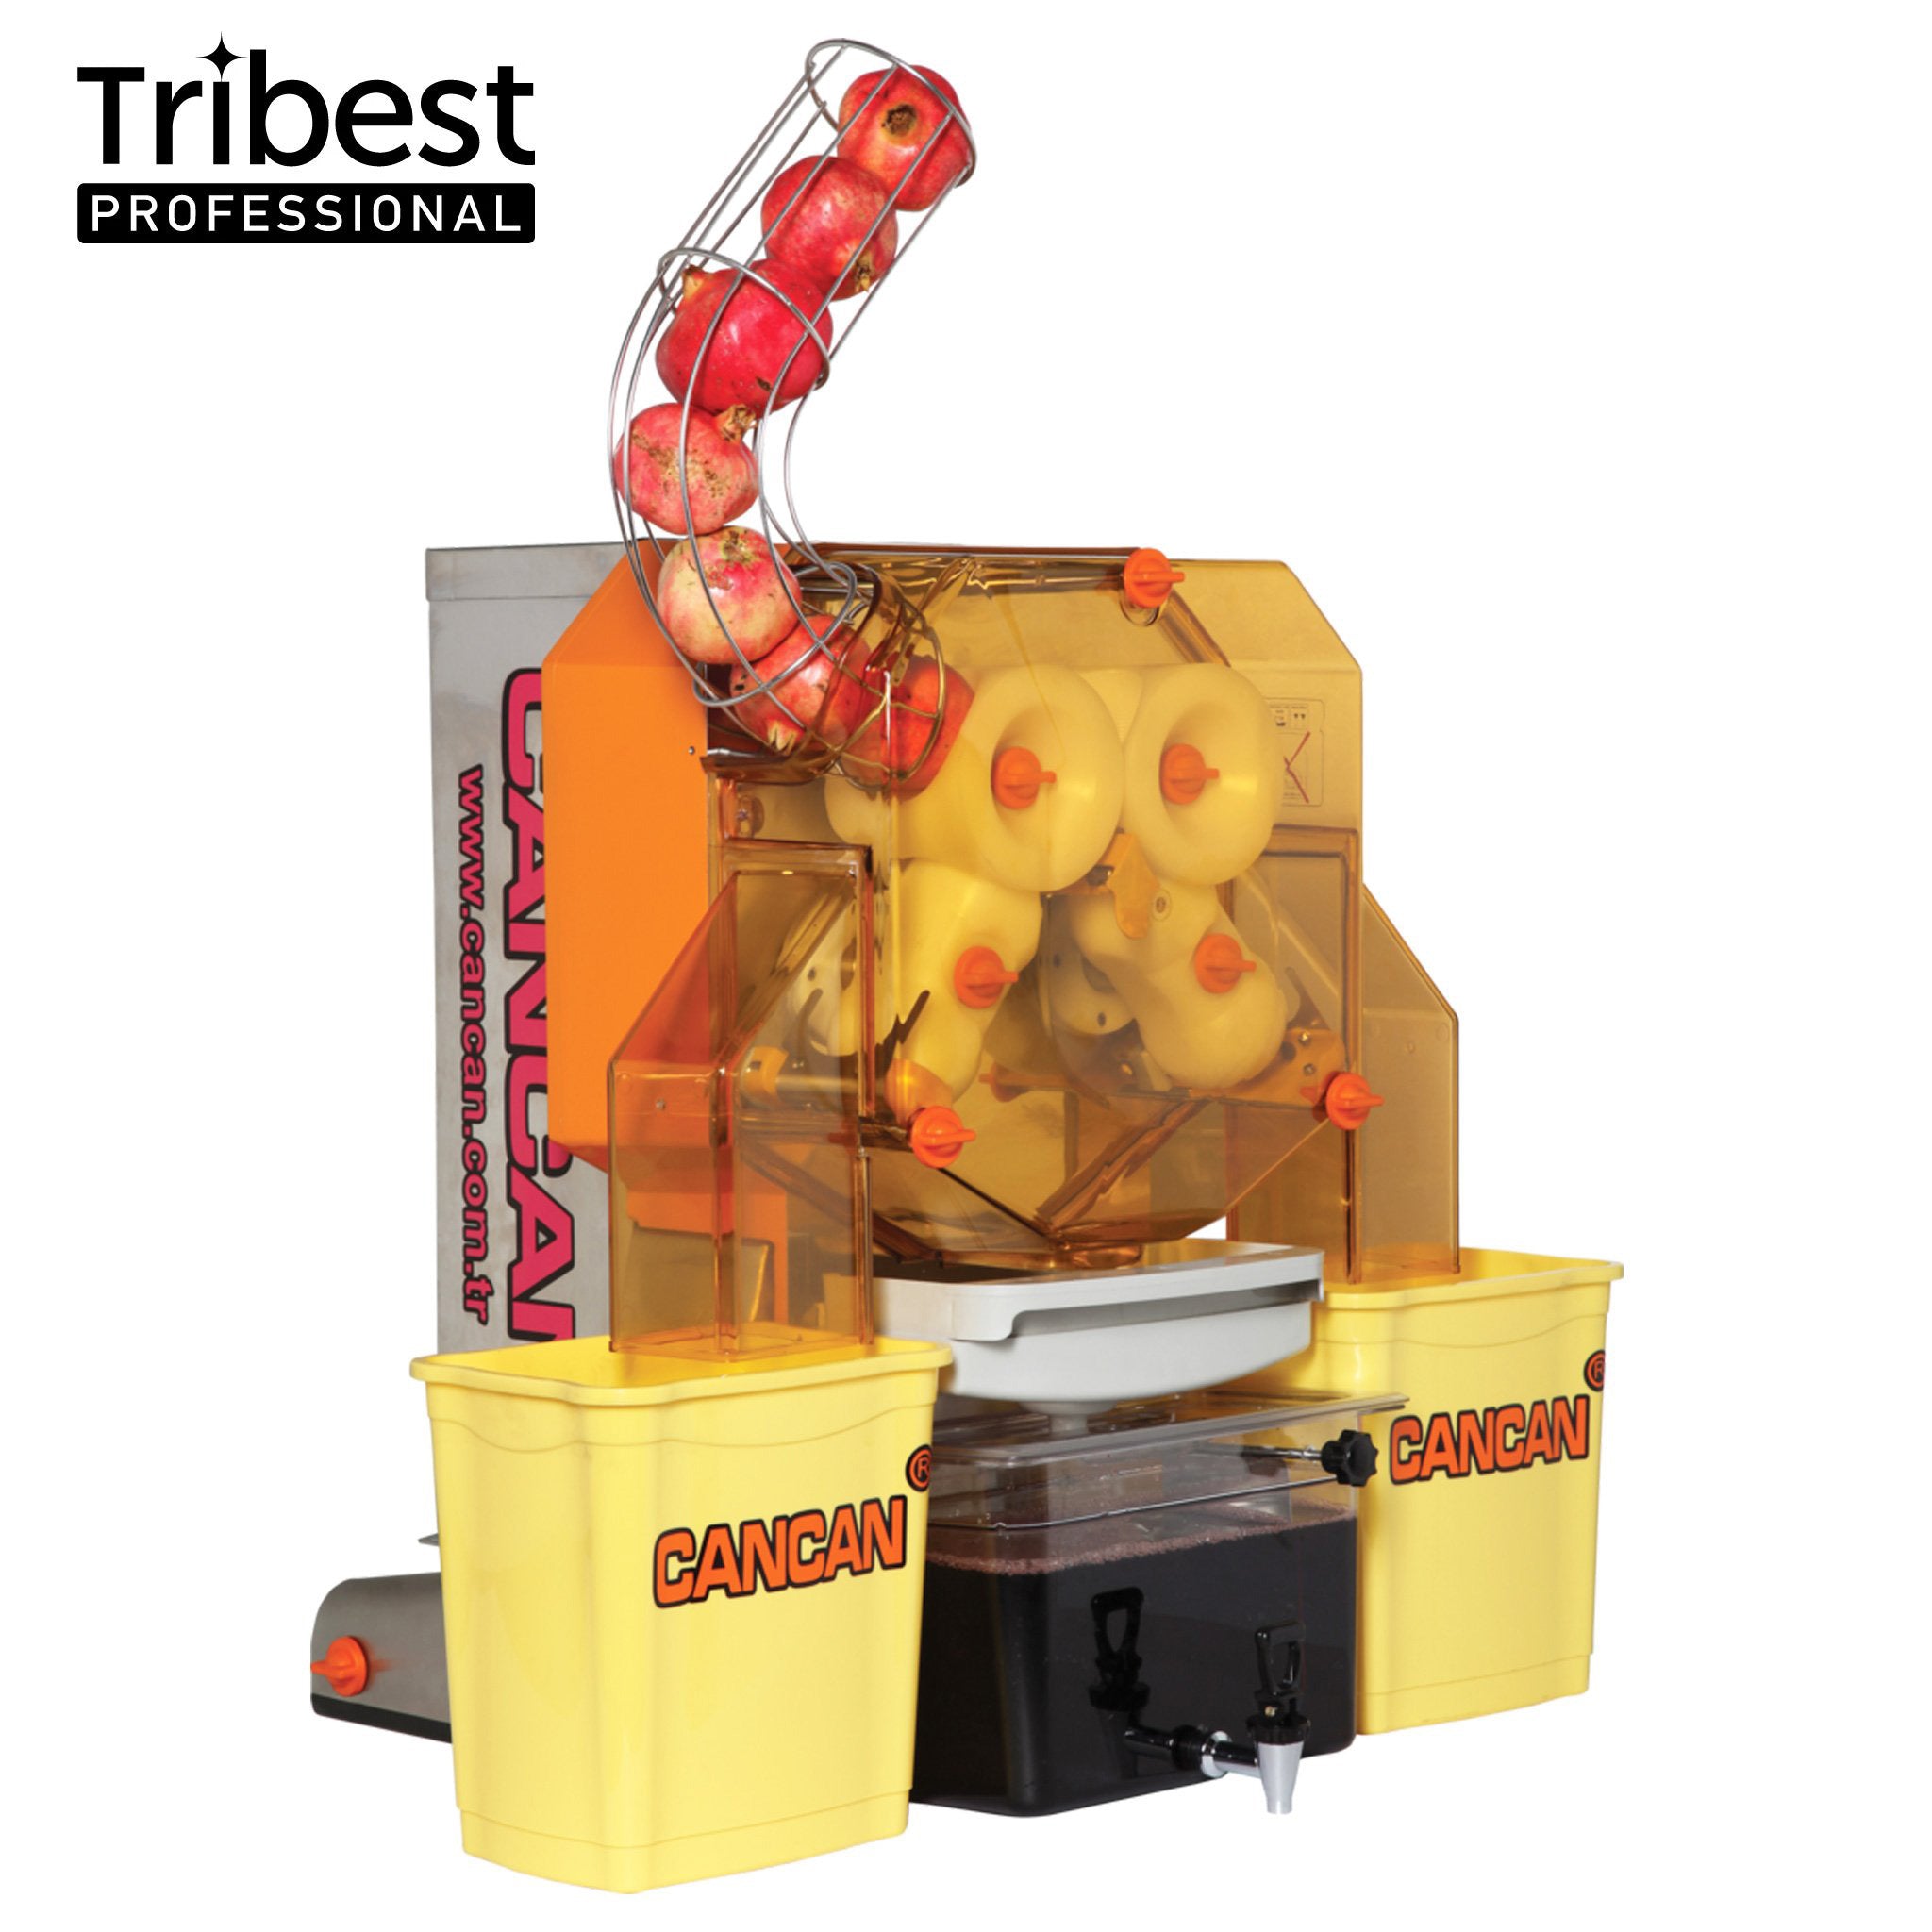 Tribest Professional Cancan Automatic Large Diameter Grapefruit and Pomegranate Juicer